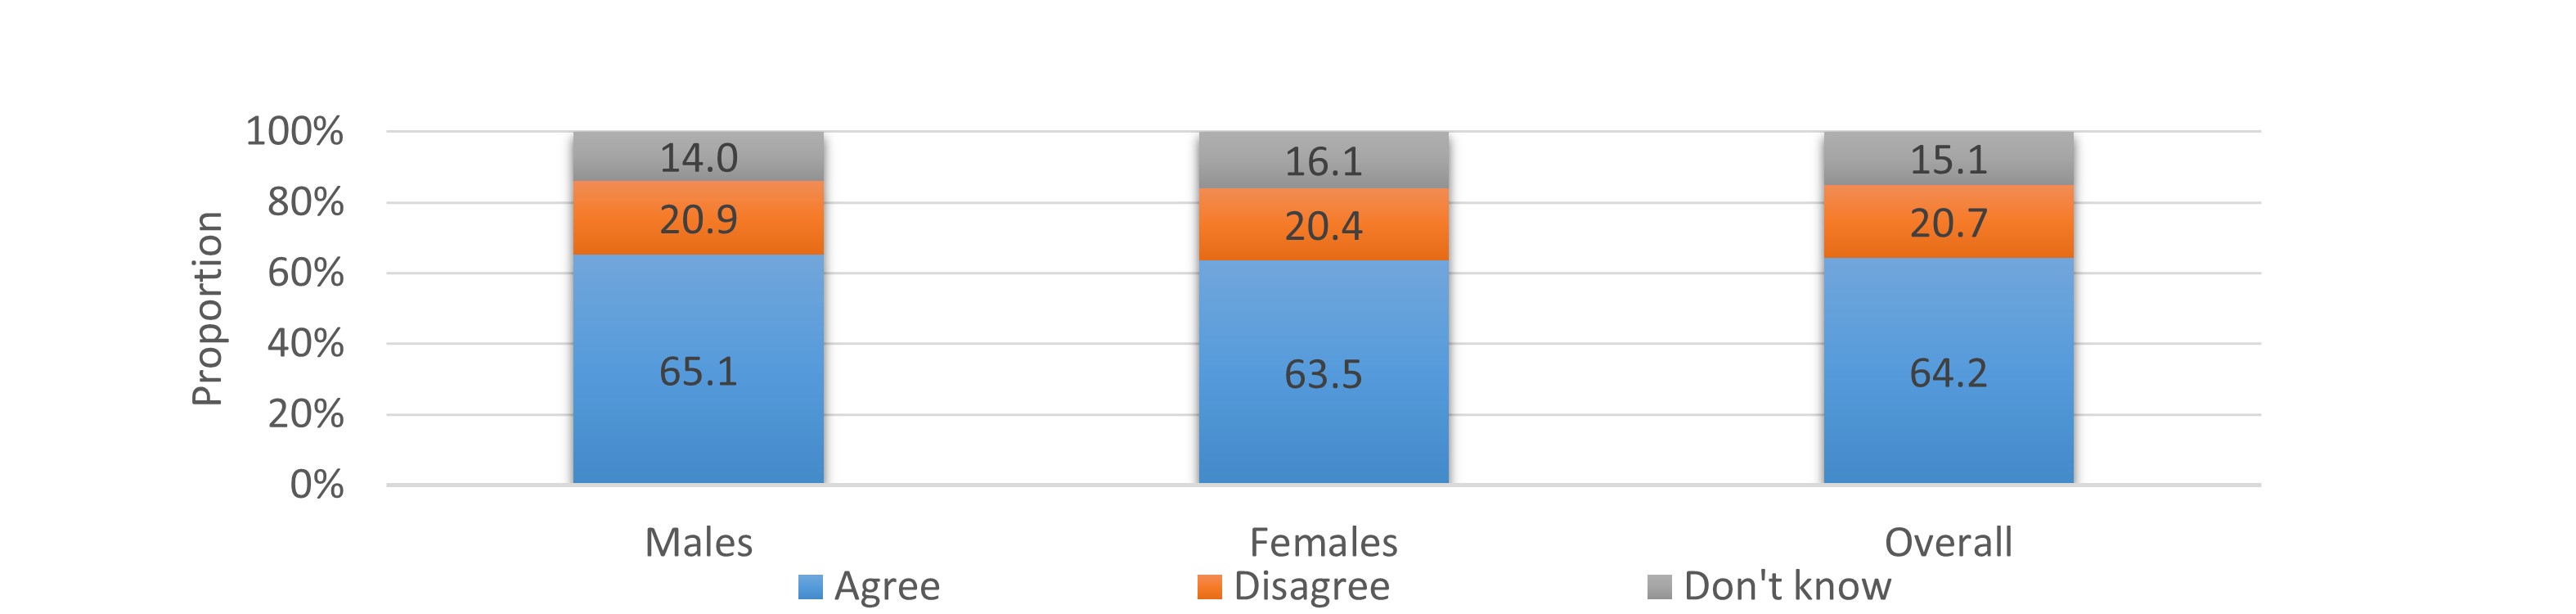 According to the Department of Health’s Population Health Survey 2020-22, 20.7% of persons aged 15 or above disagreed with the incorrect statement “Alcohol is harmful to health only when drinking regularly or heavily”. The corresponding proportion among females and males were 20.4% and20.9% respectively.